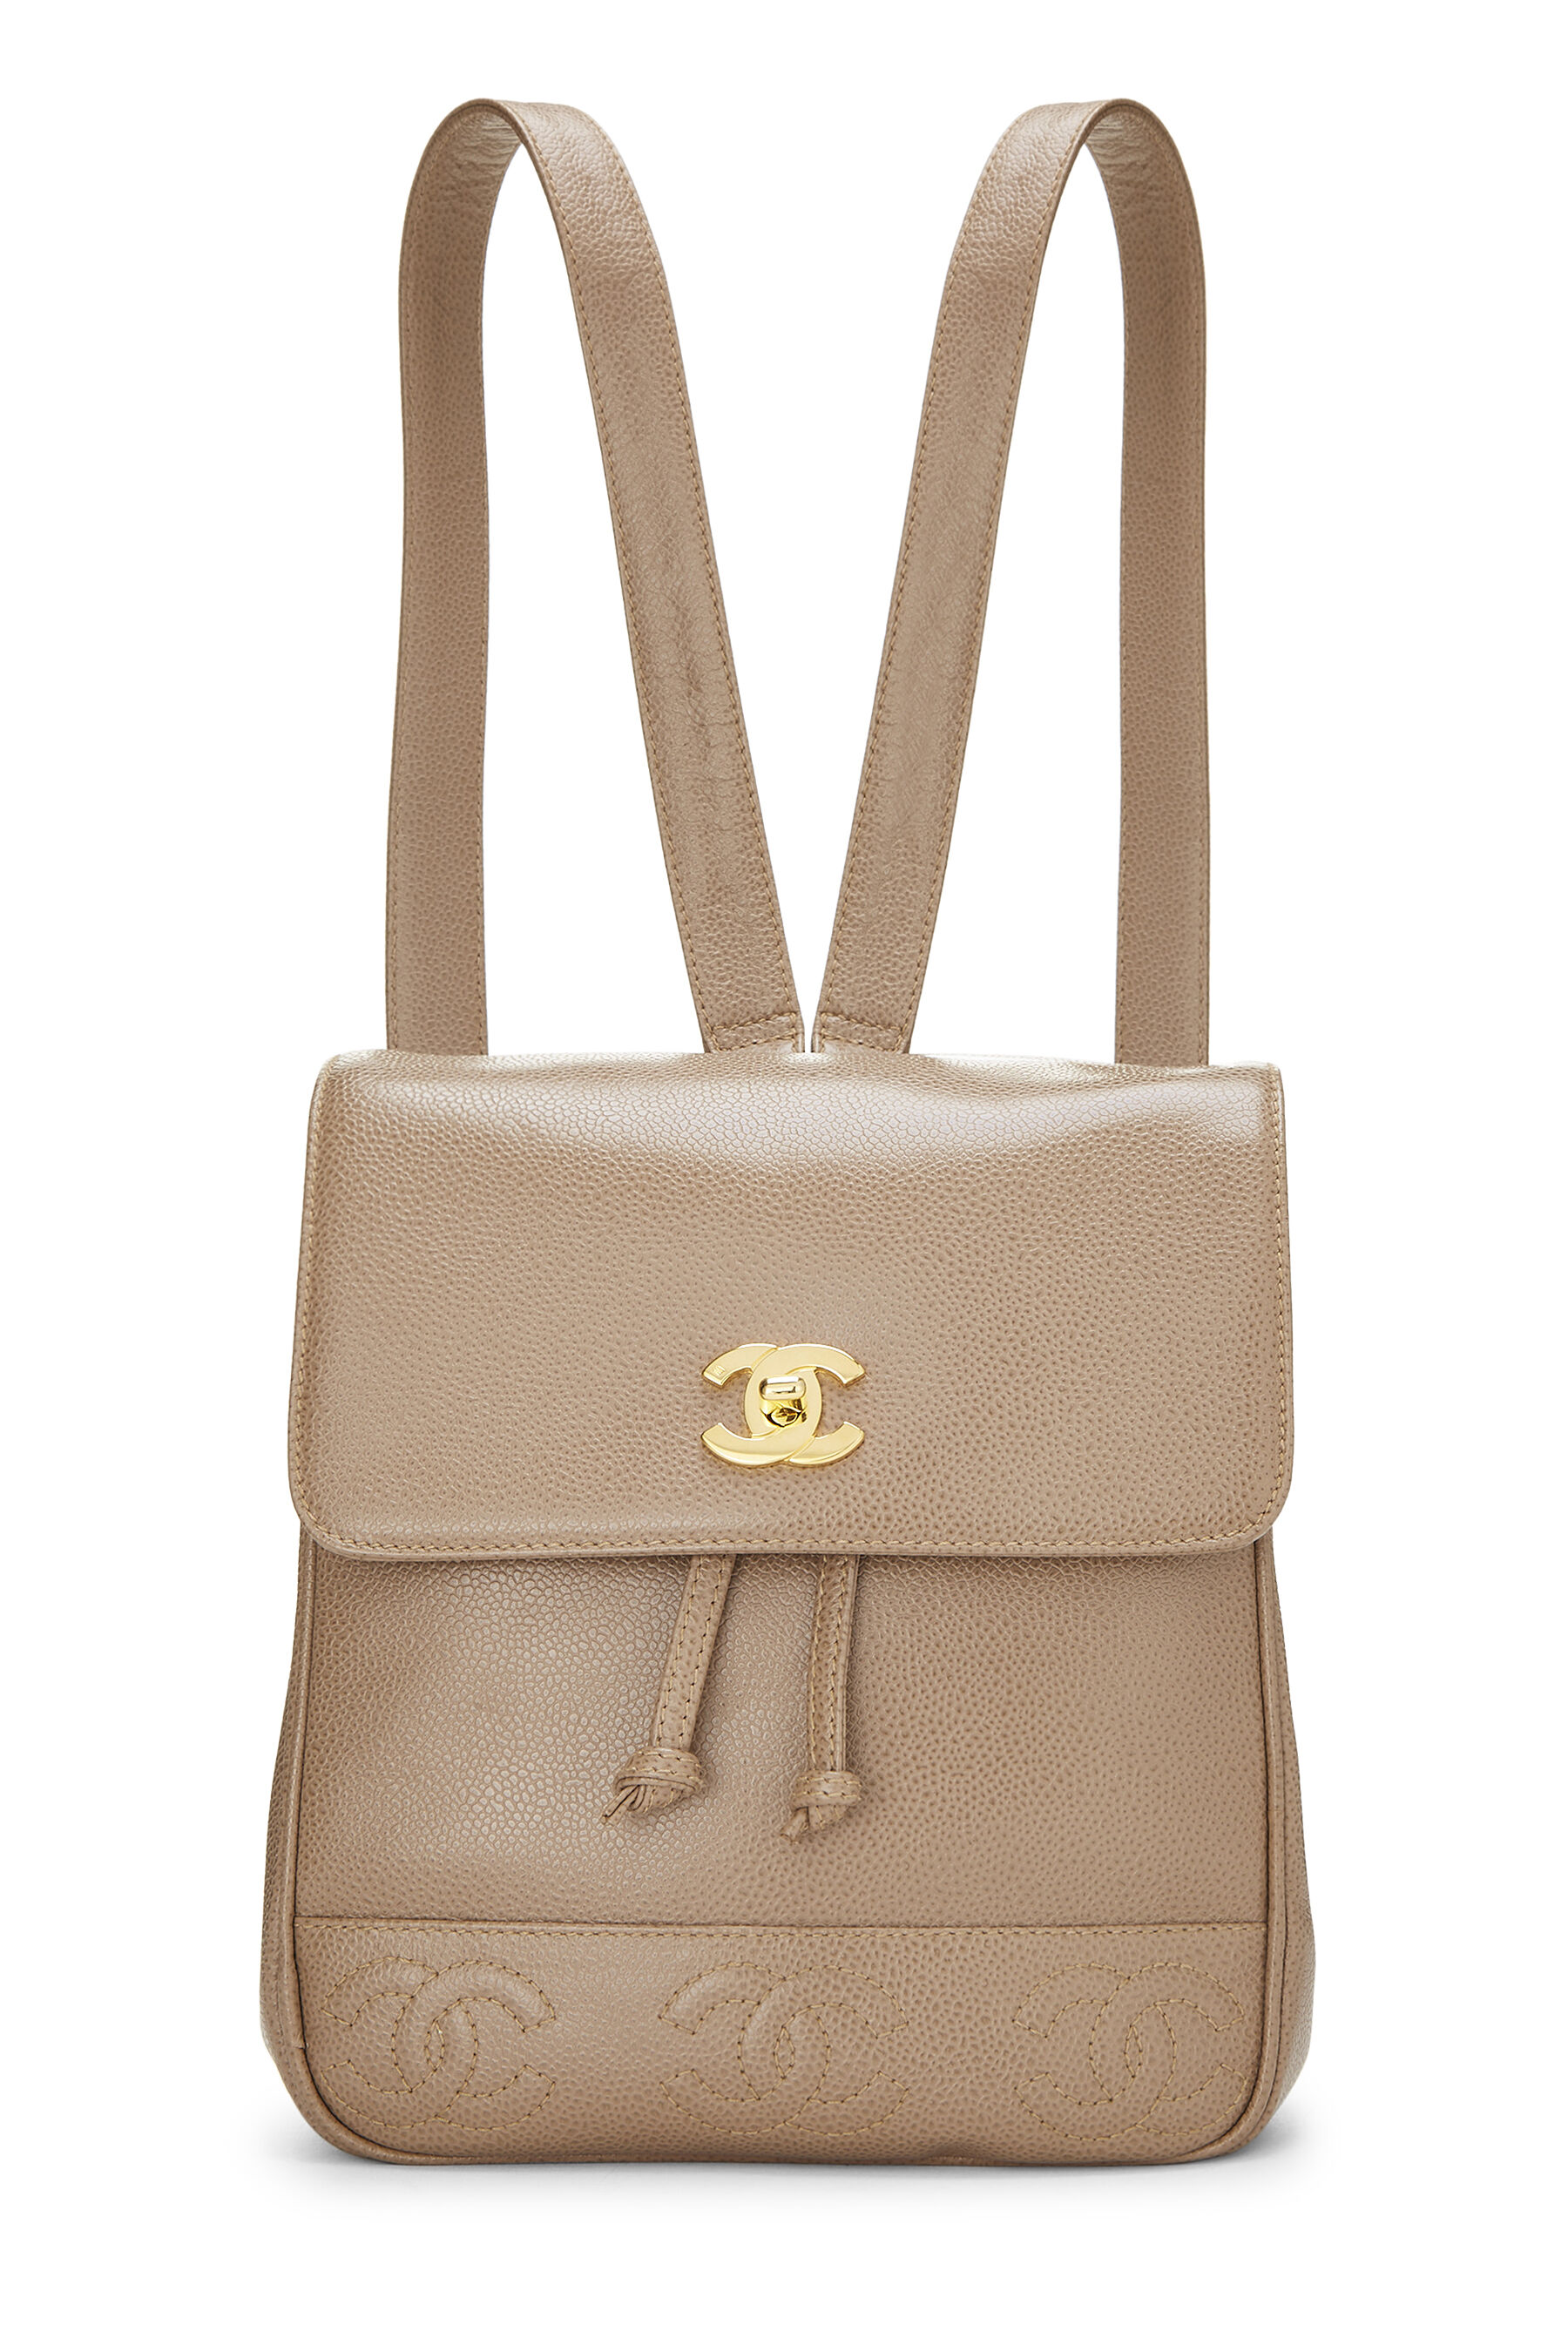 Chanel - Beige Caviar 3 CC Backpack Small